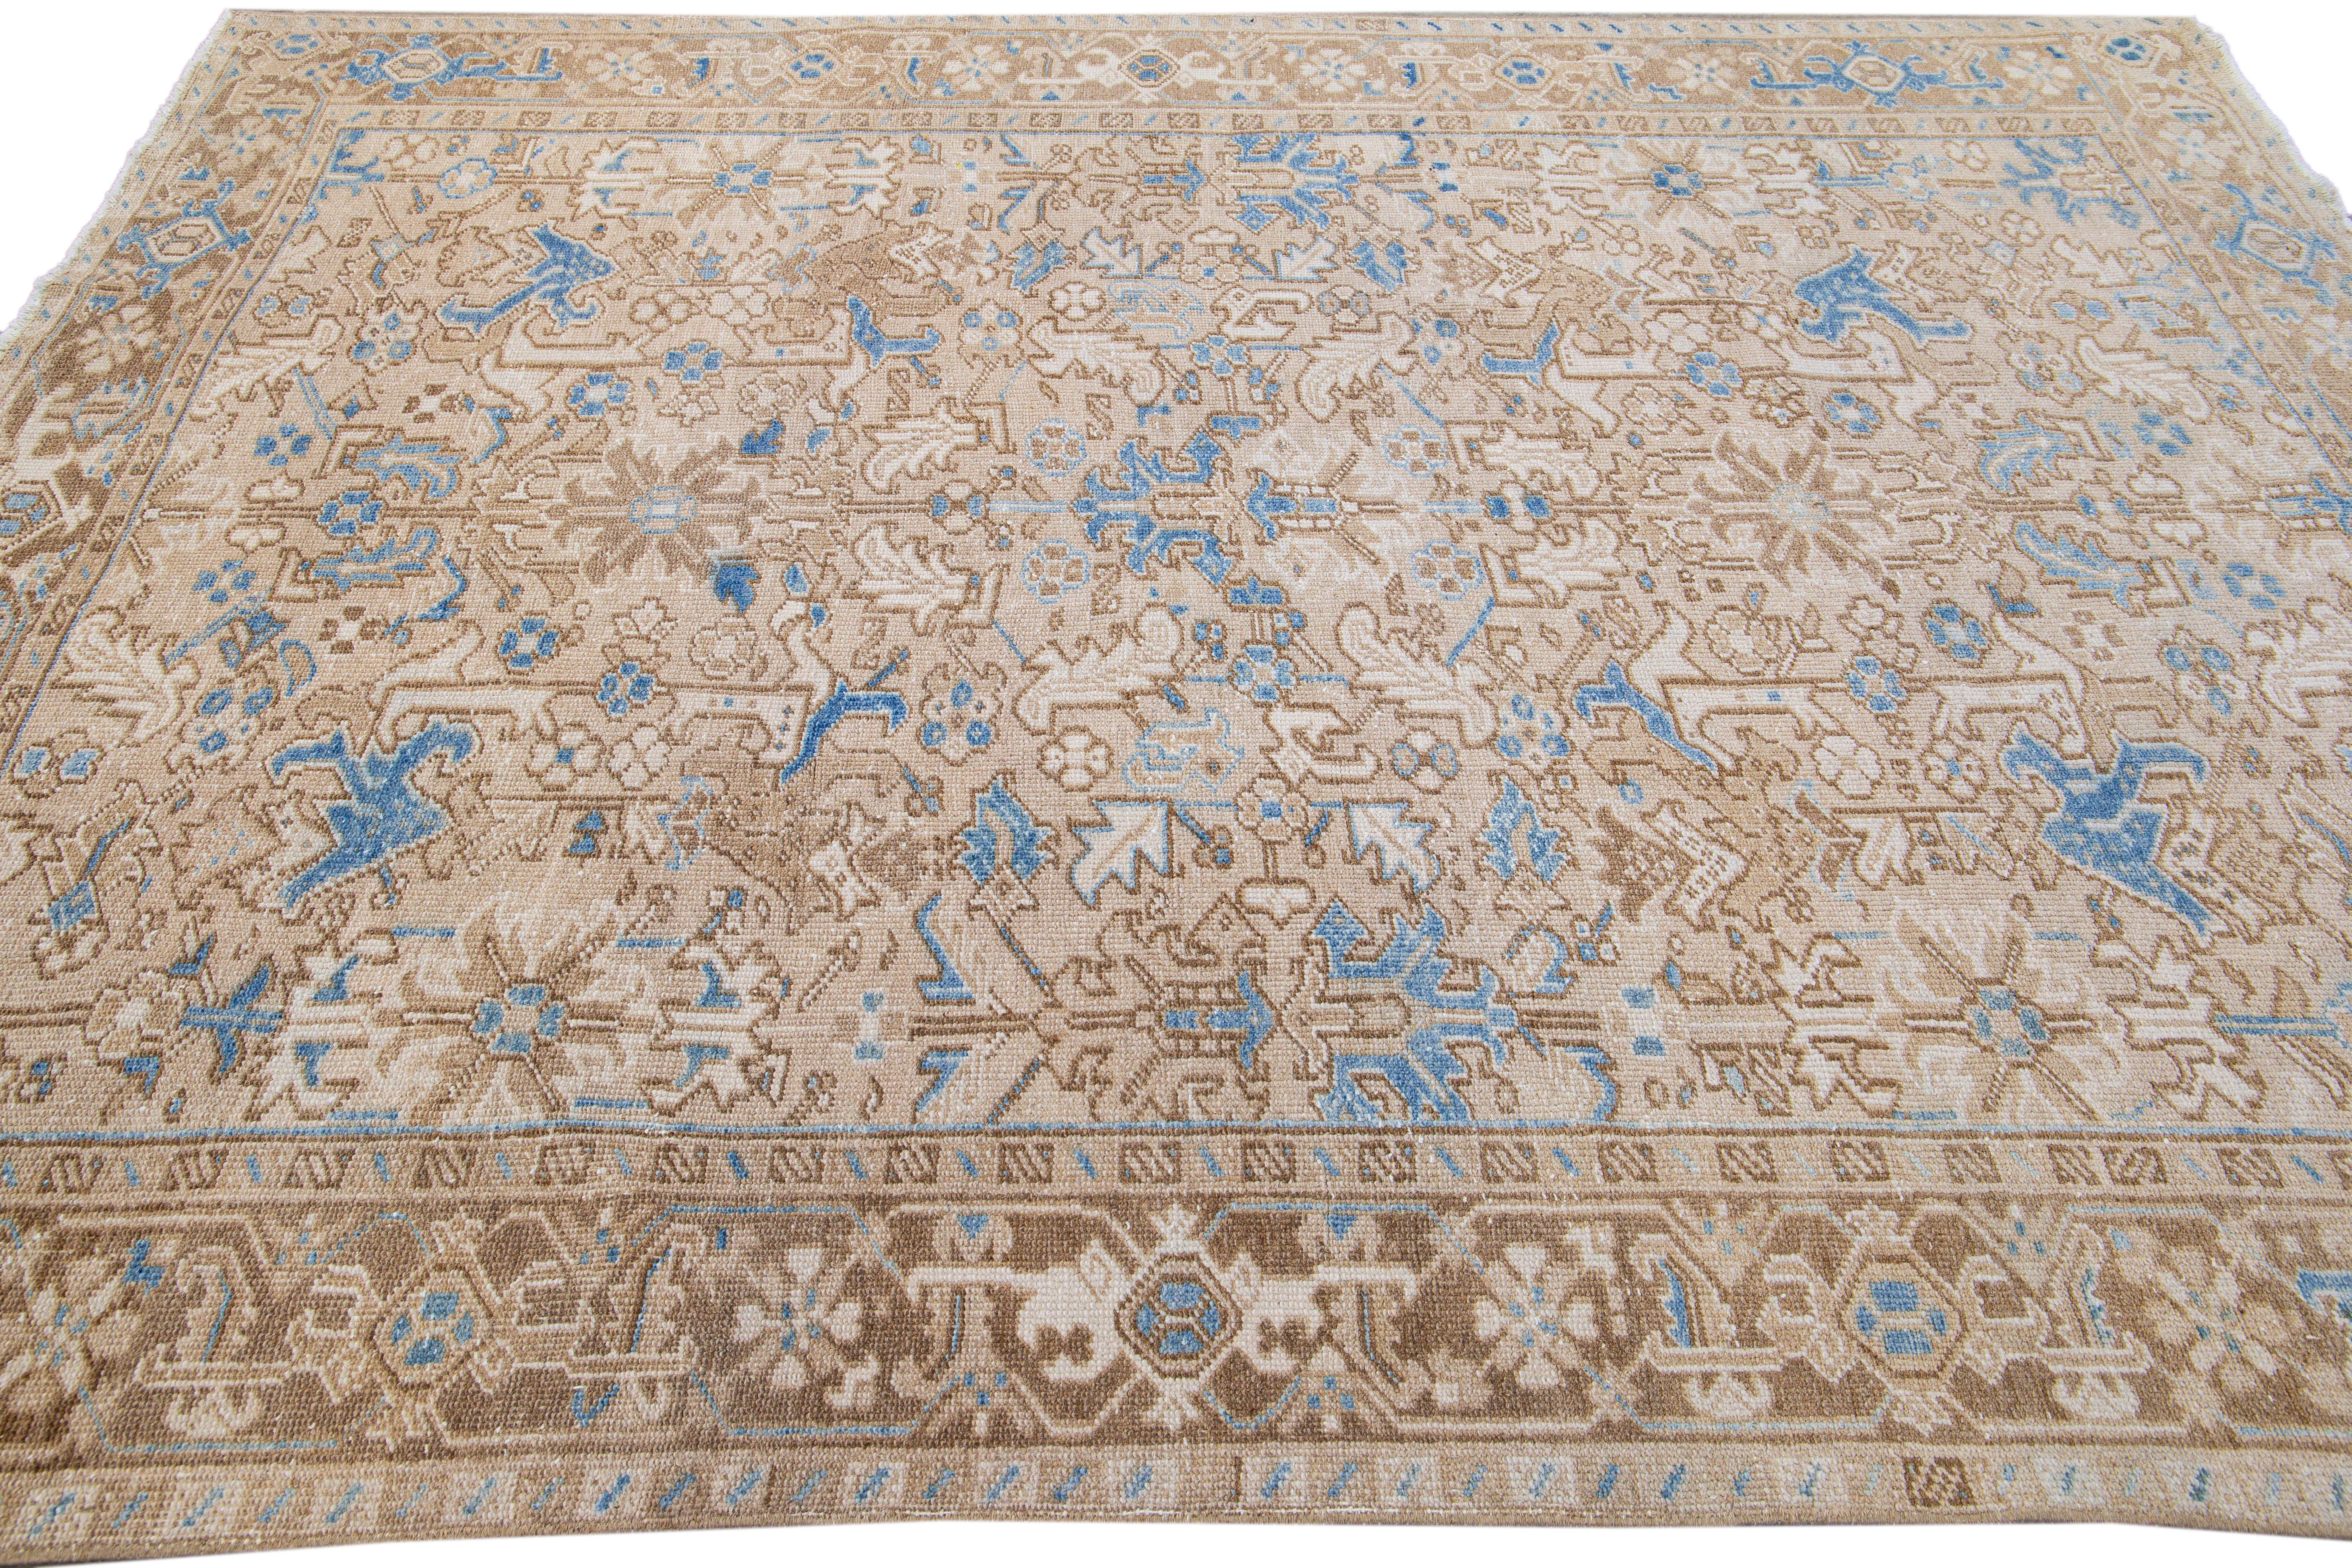 Early 20th Century Antique Persian Heriz Handmade Geometric Floral Beige and Blue Wool Rug For Sale